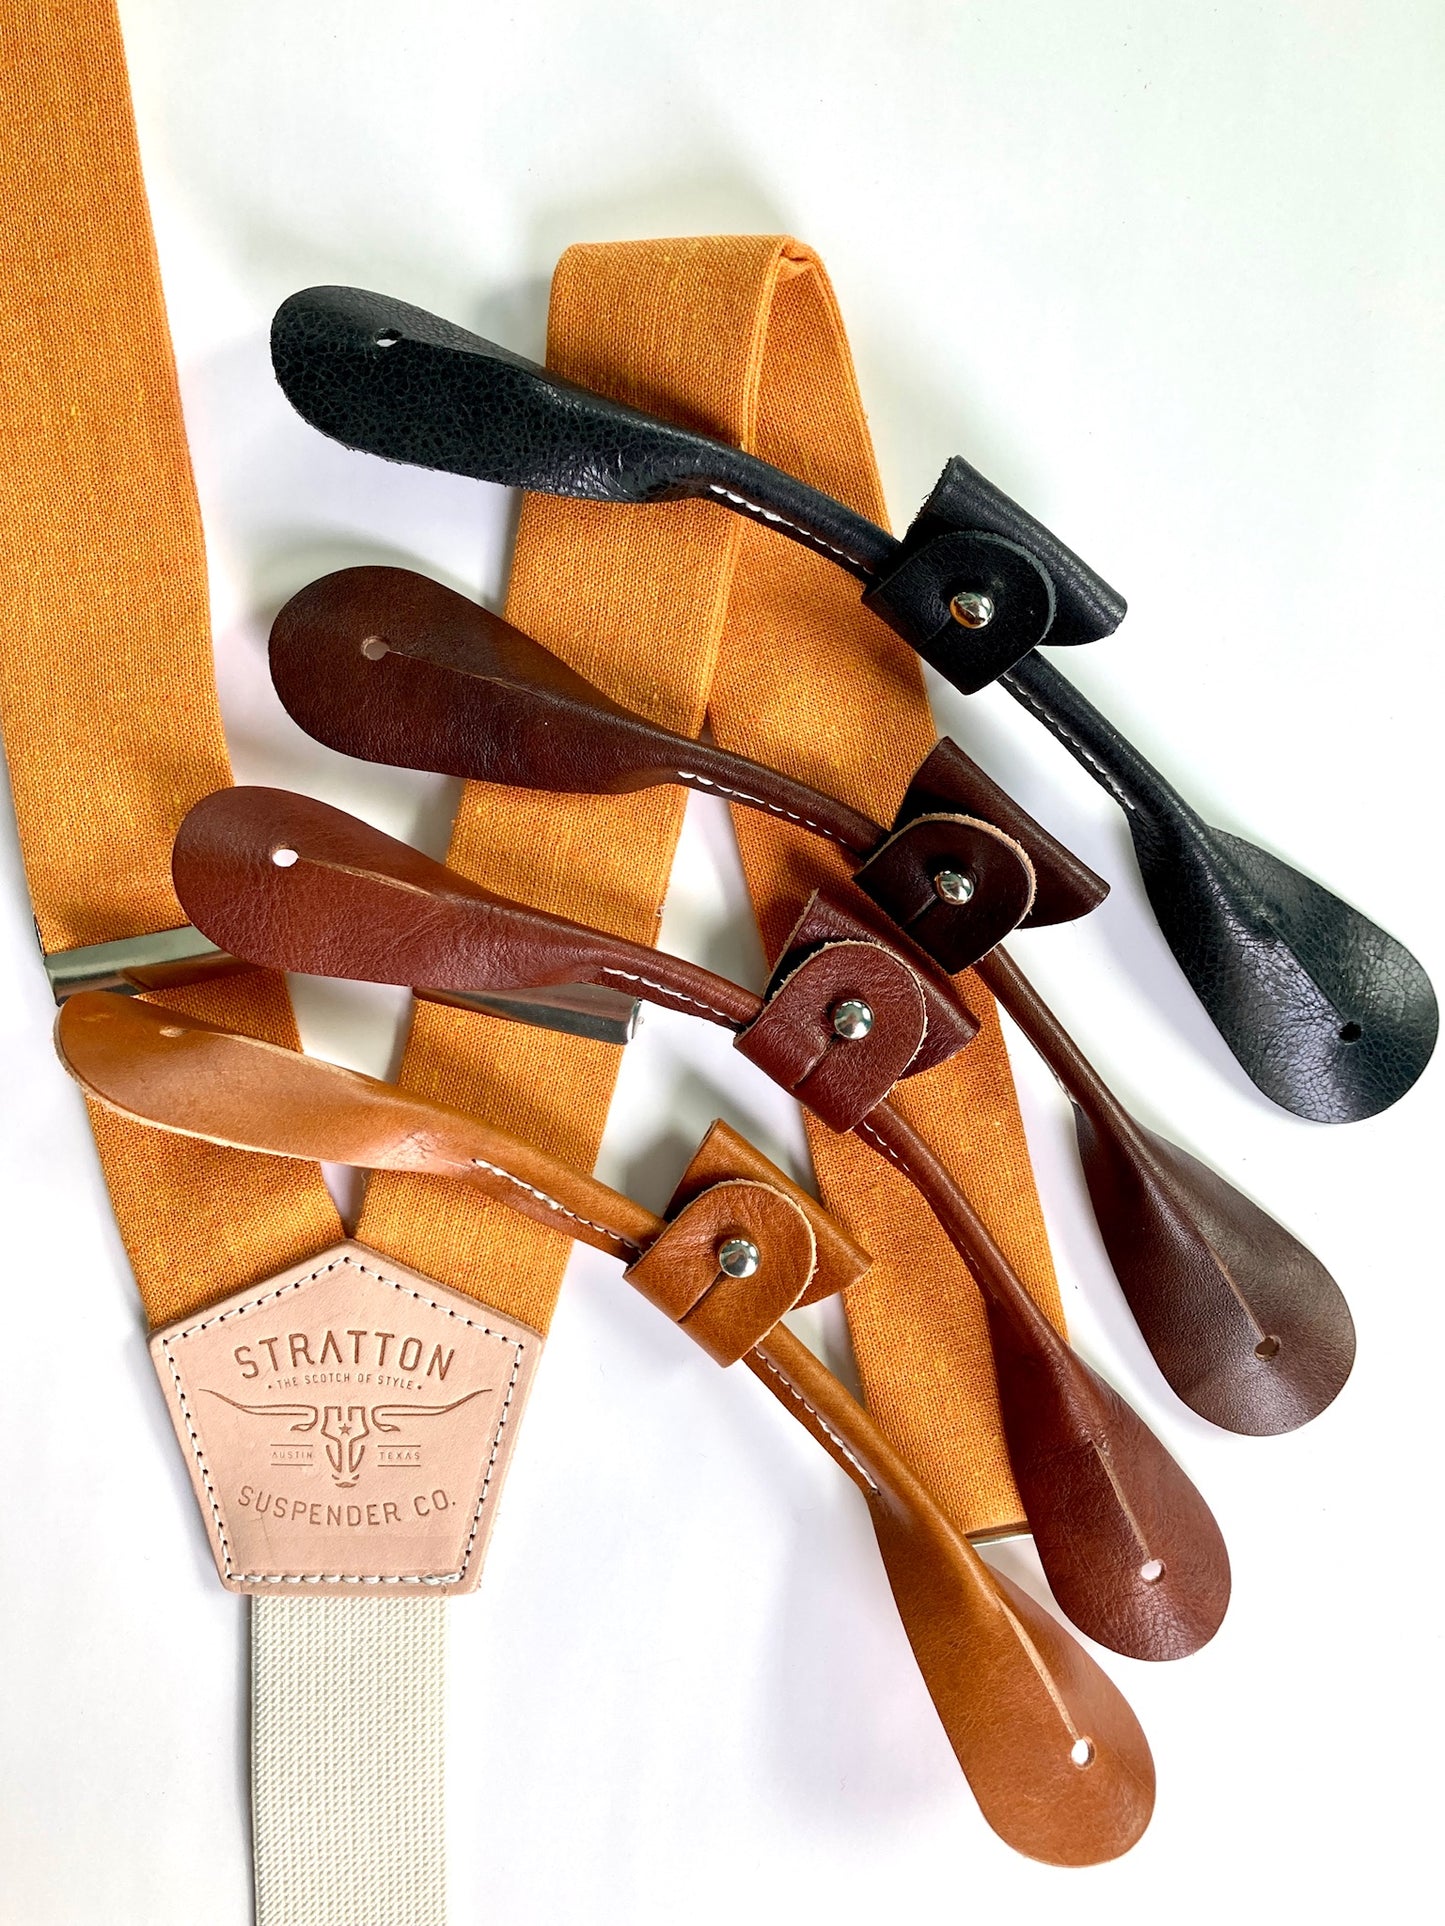 Orange Linen Stratton Suspender Co. Set with one button on attachment in the following colors from top to bottom: Black, Chocolate (dark brown), Cognac (reddish brown), Tan (light brown)